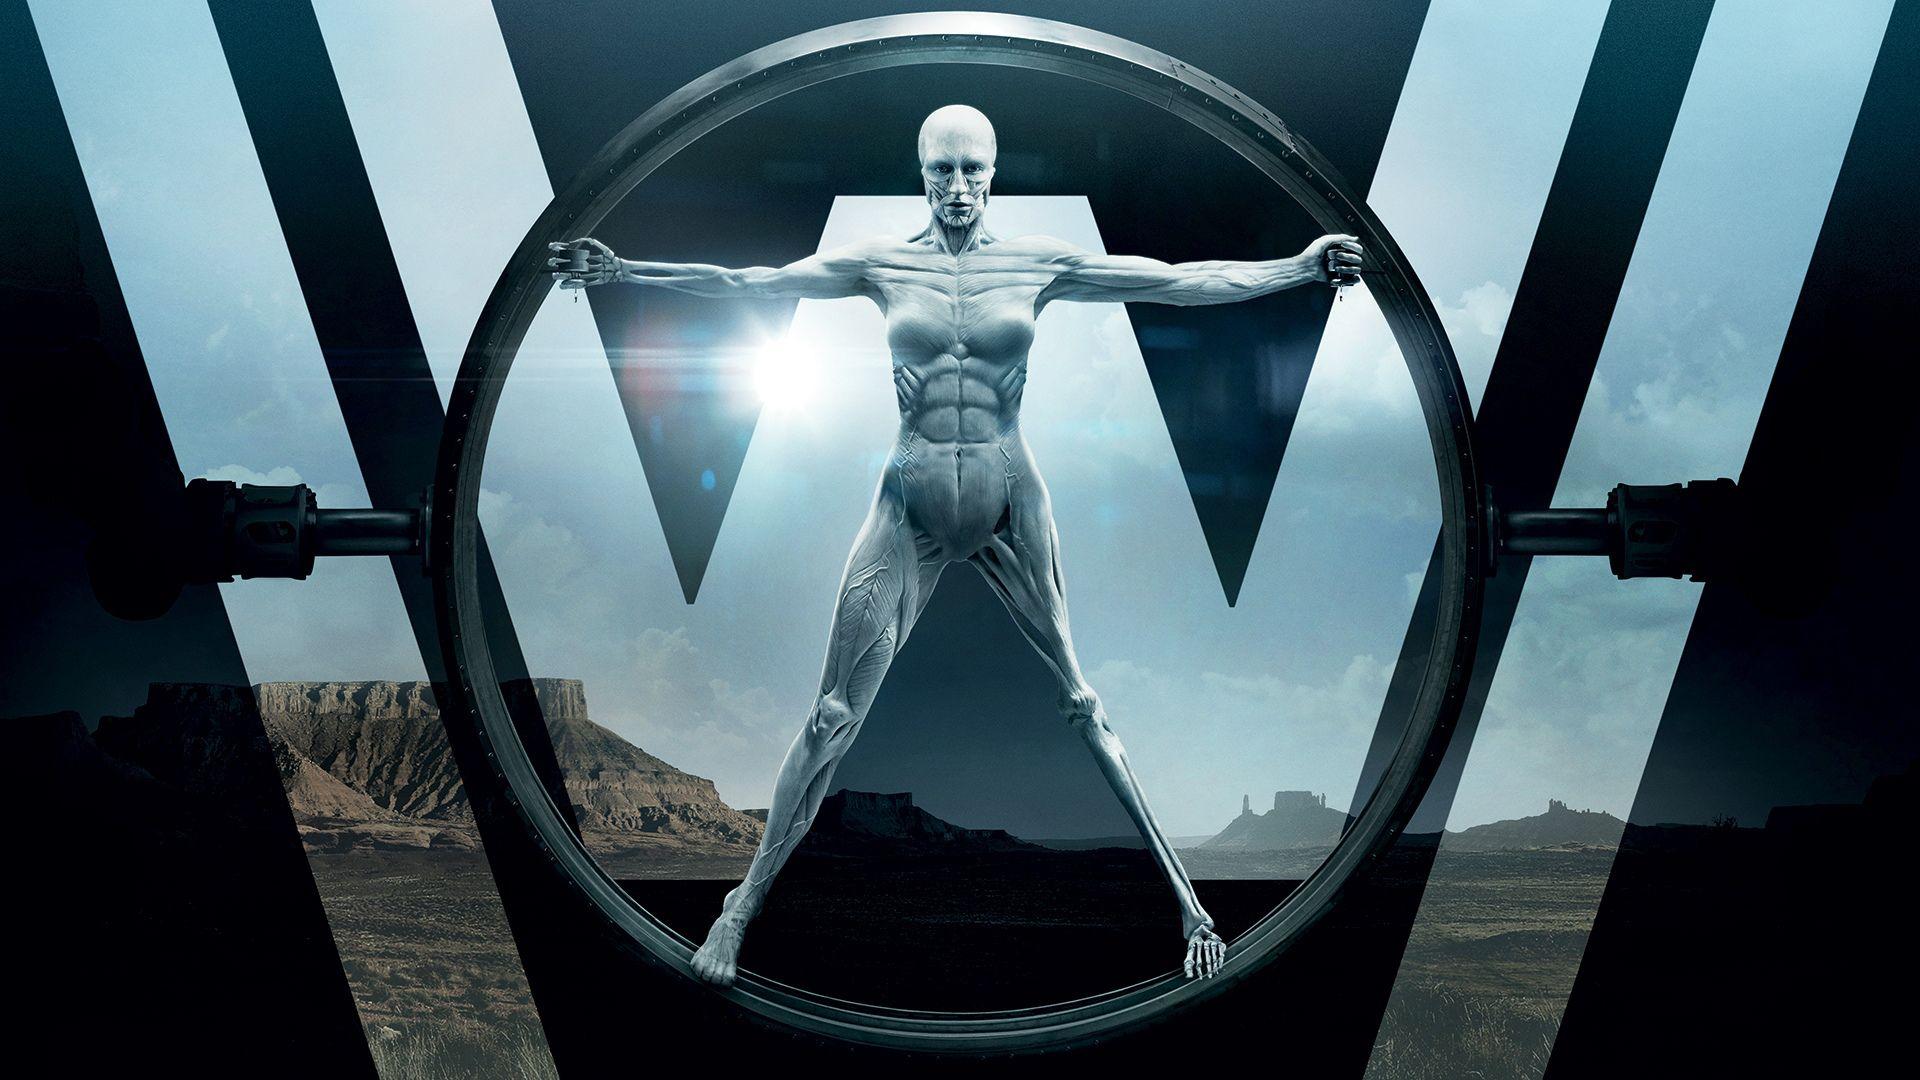 Westworld season 2: What we want and can expect after season 1